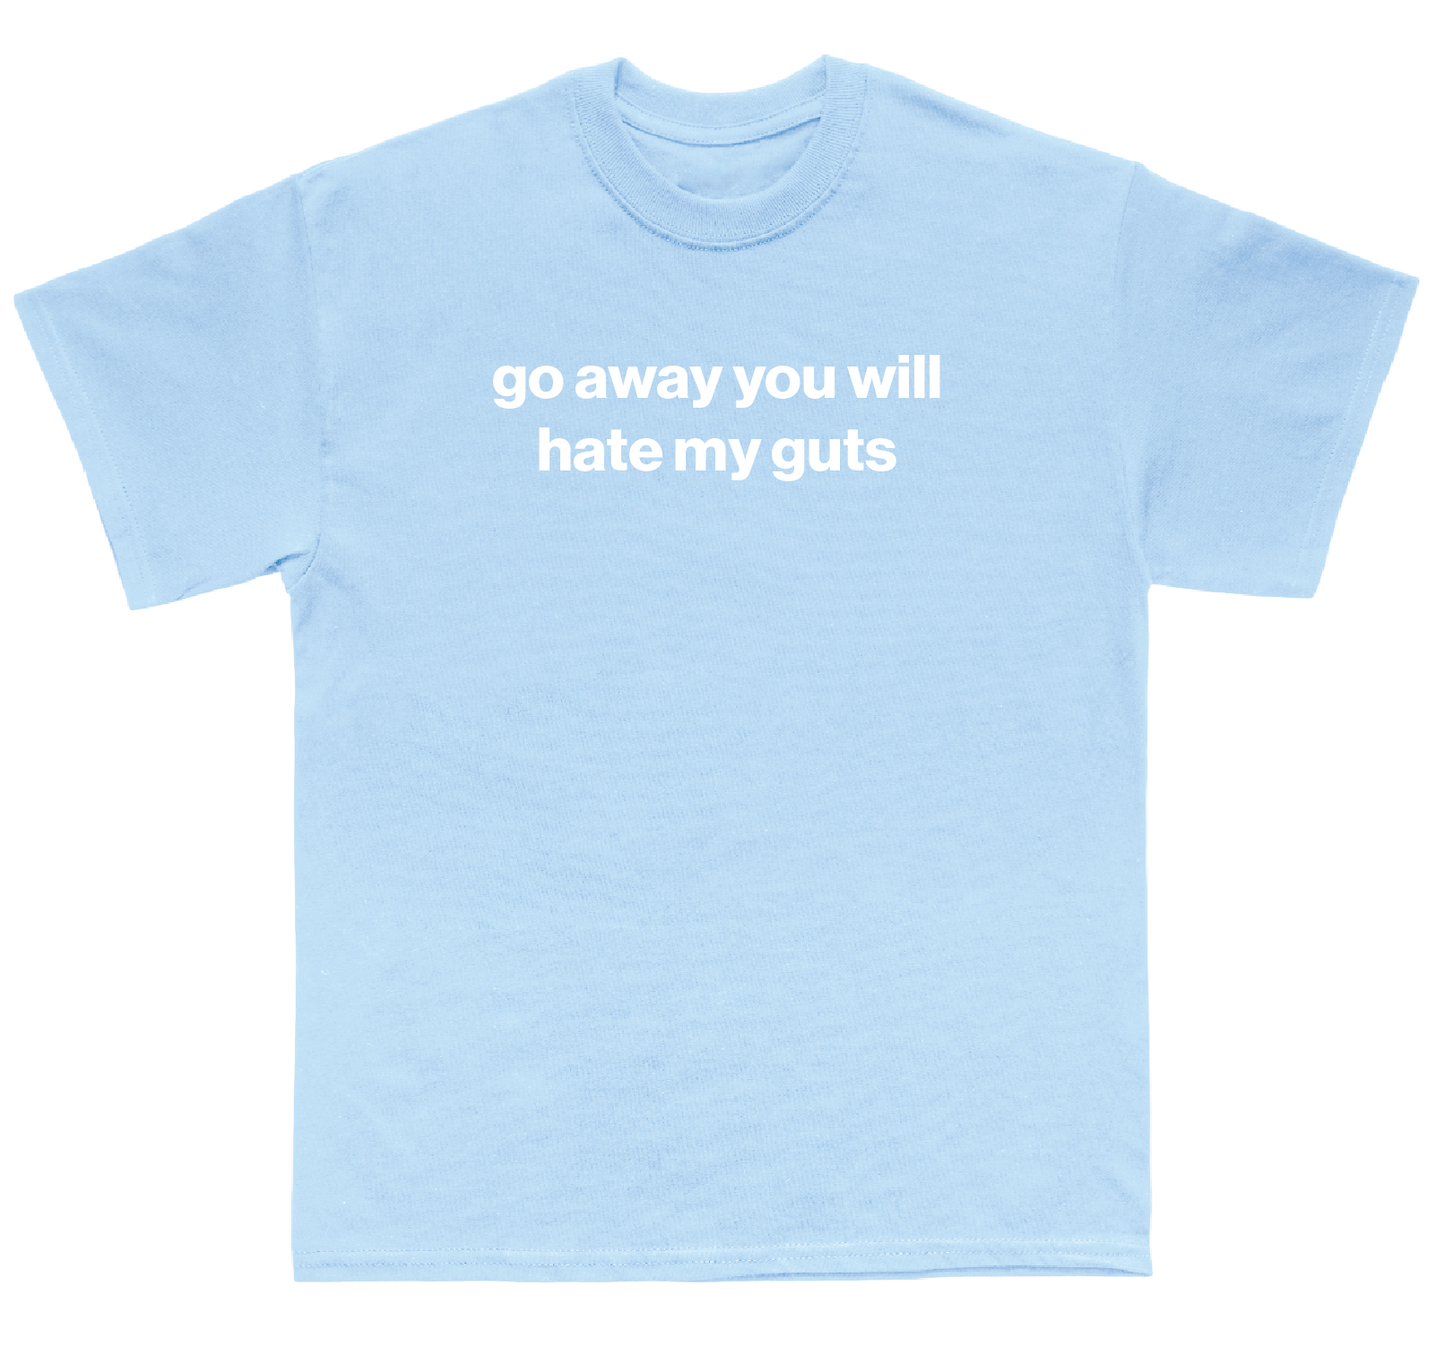 go away you will hate my guts shirt